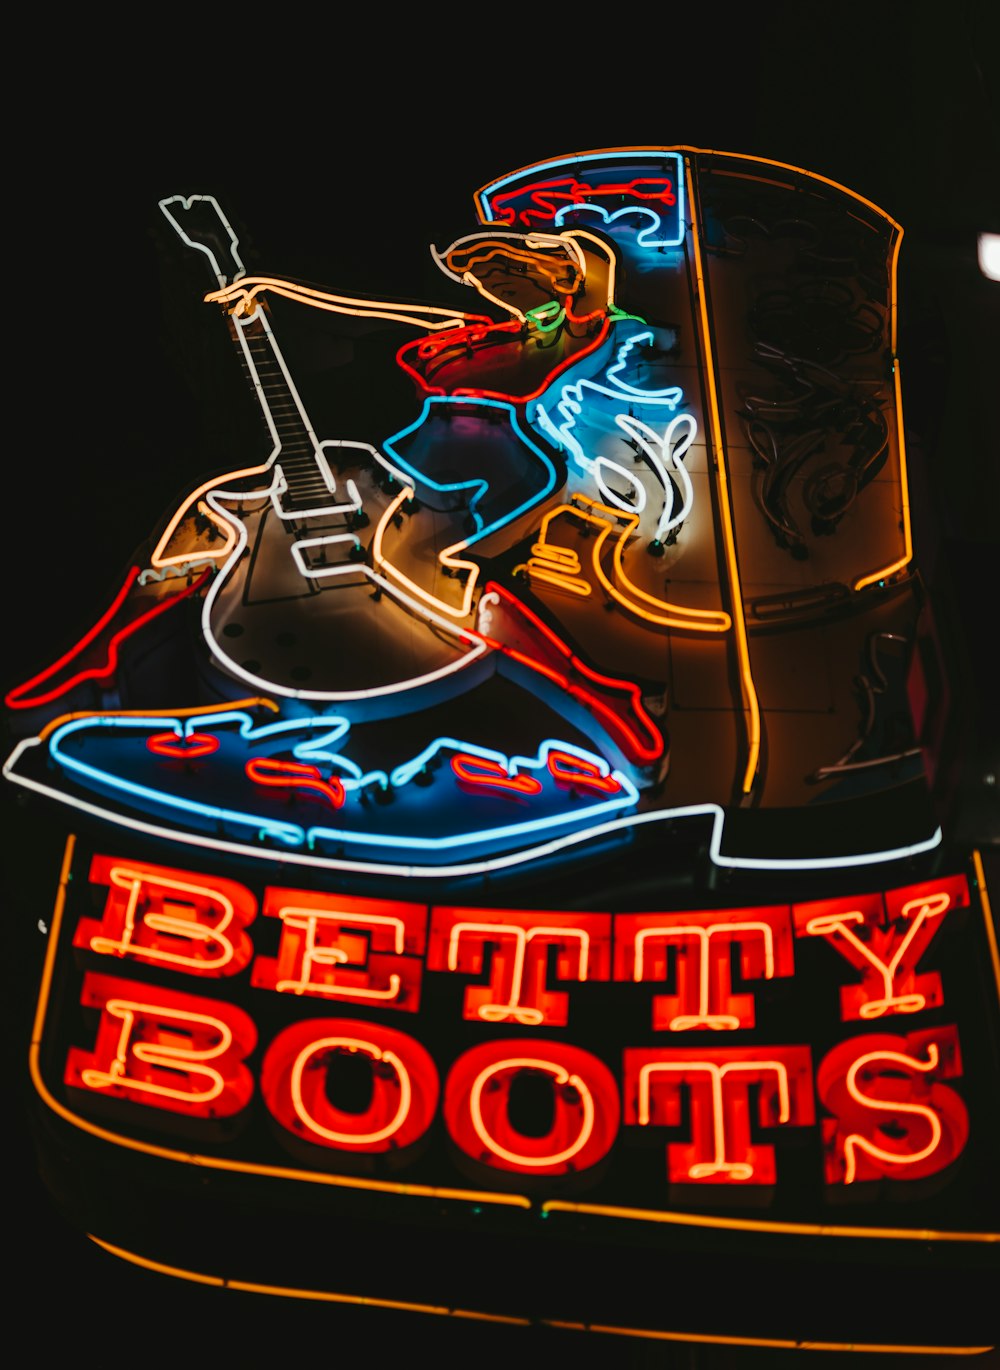 turned-on Betty Boots neon signage at night